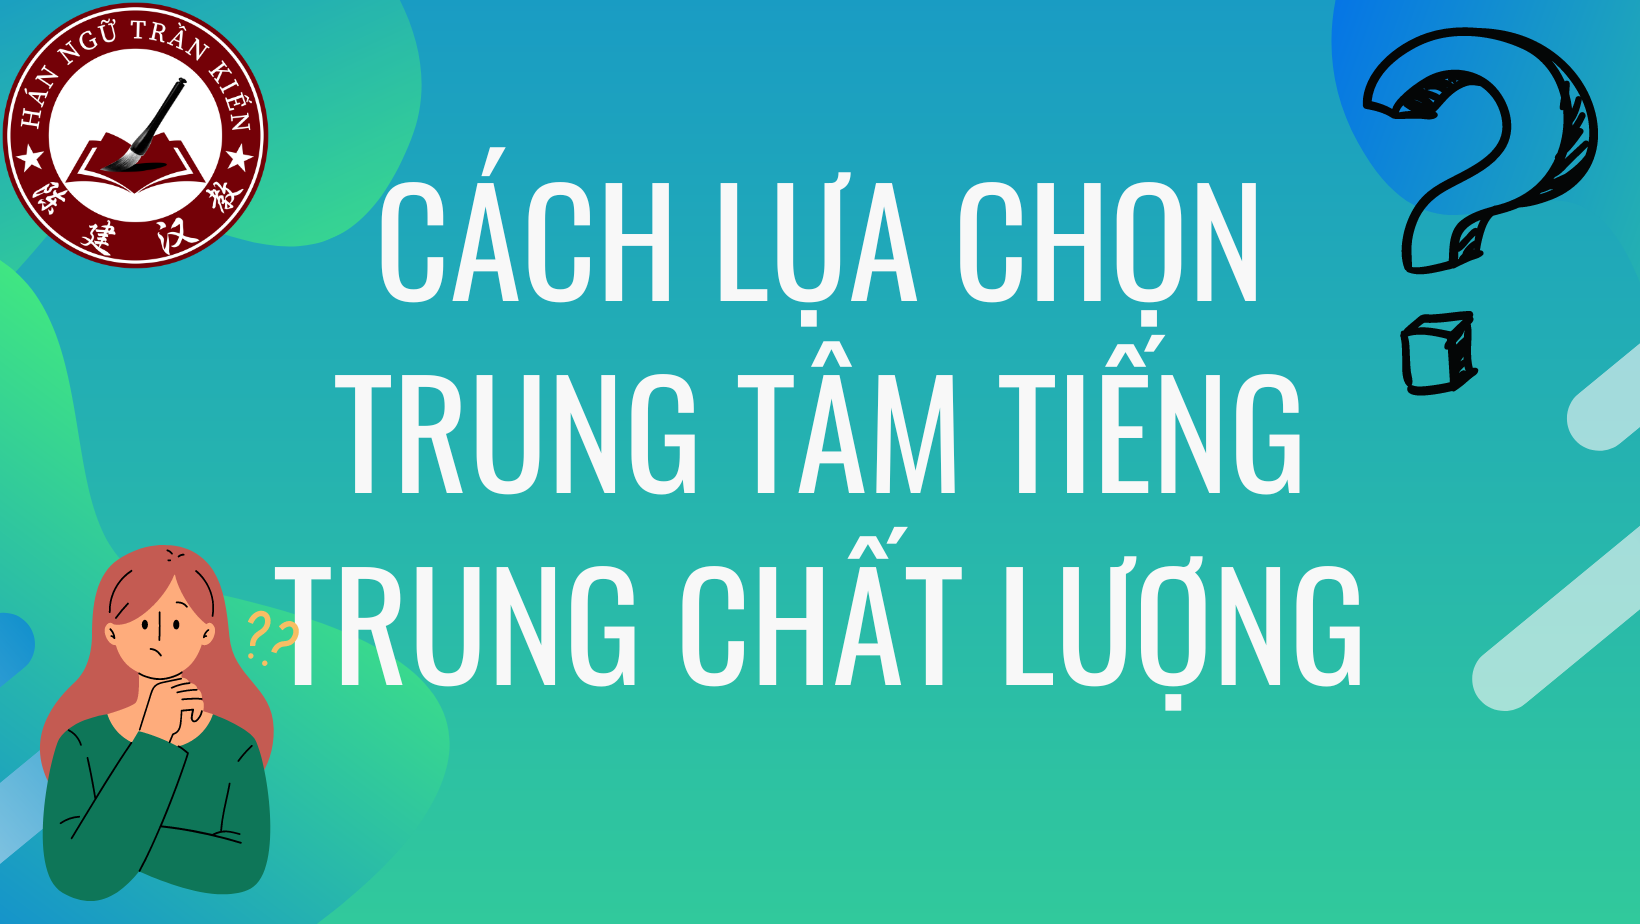 Cach lua chon Trung tam tieng Trung chat luong 1